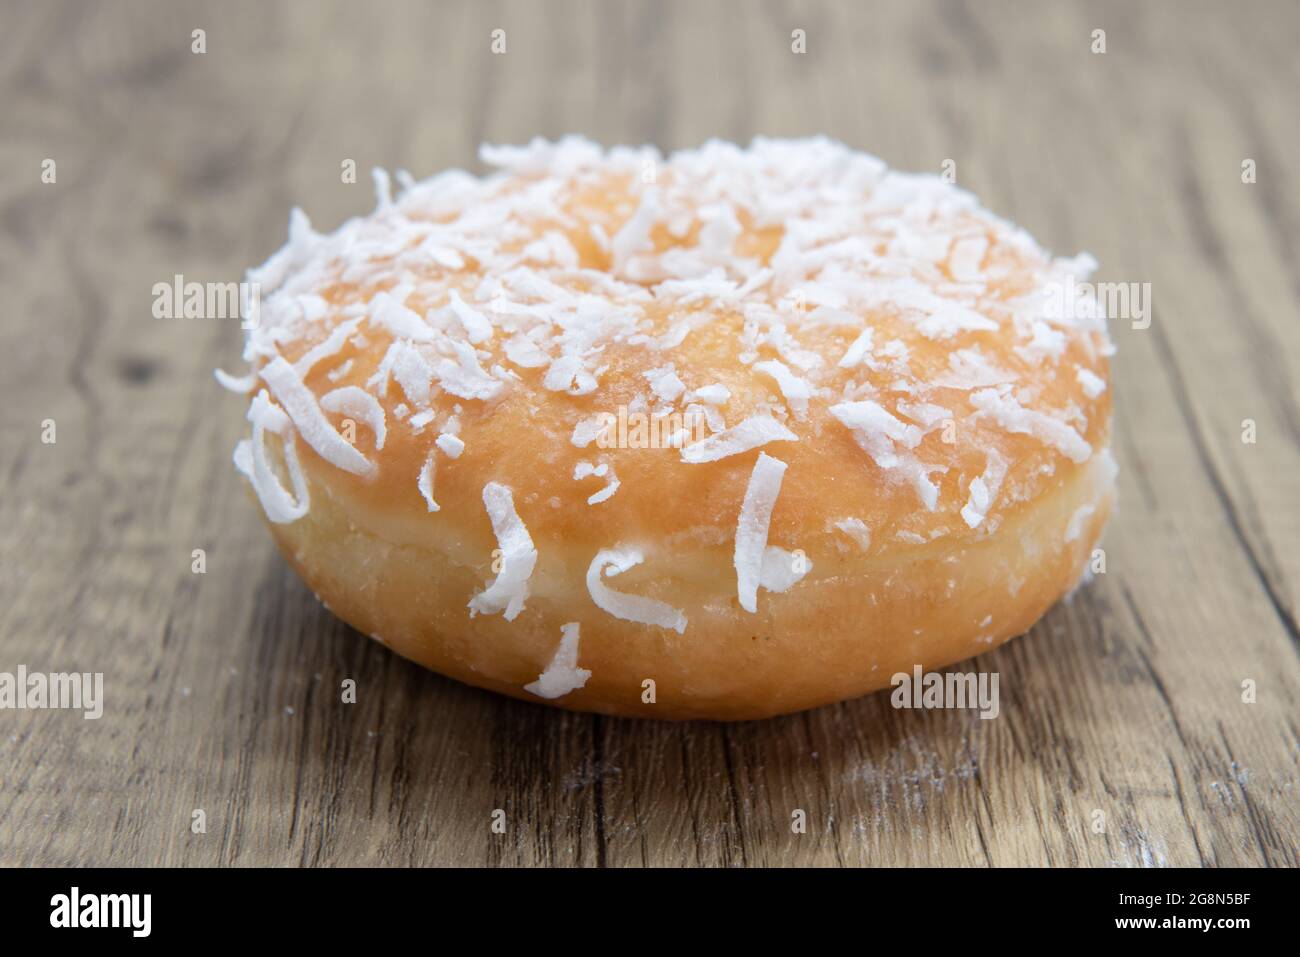 Cocnut raised  donut is textured with glazed coating for a sweet treat delight. Stock Photo